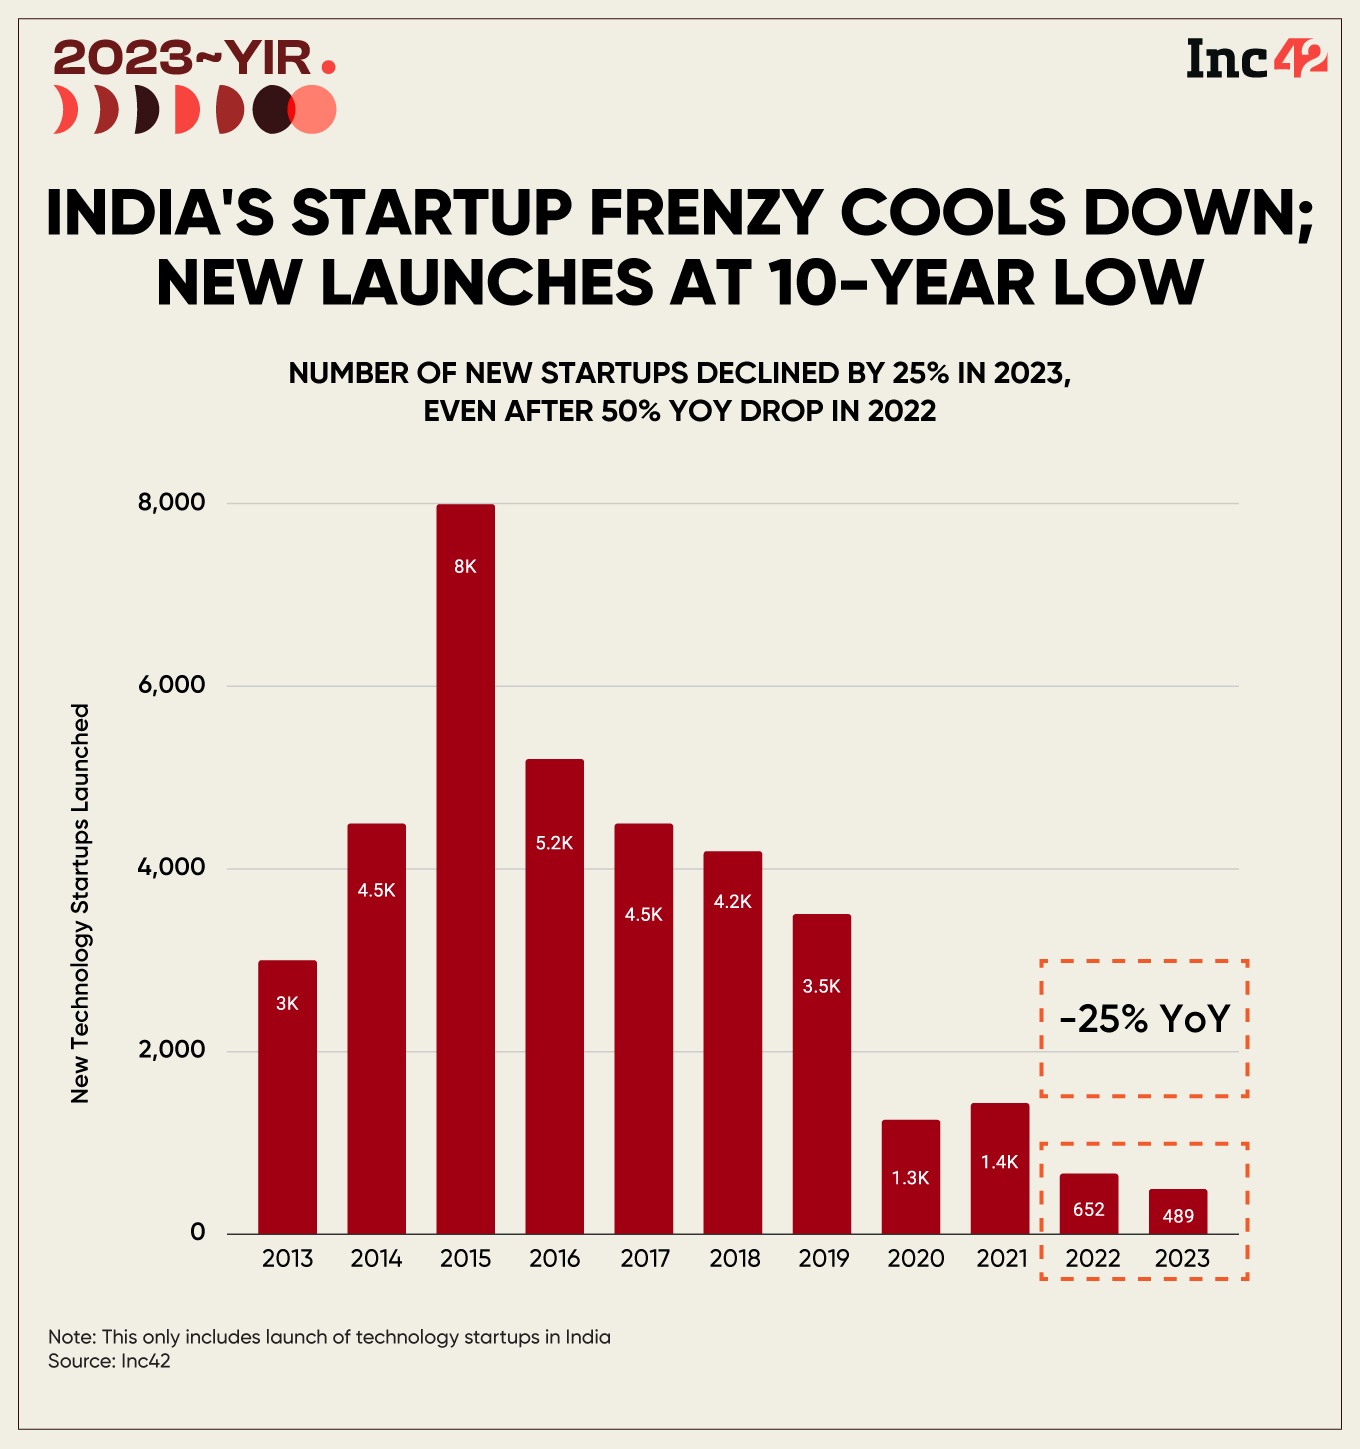 New Indian Startups In 2023 Sees Big Drop